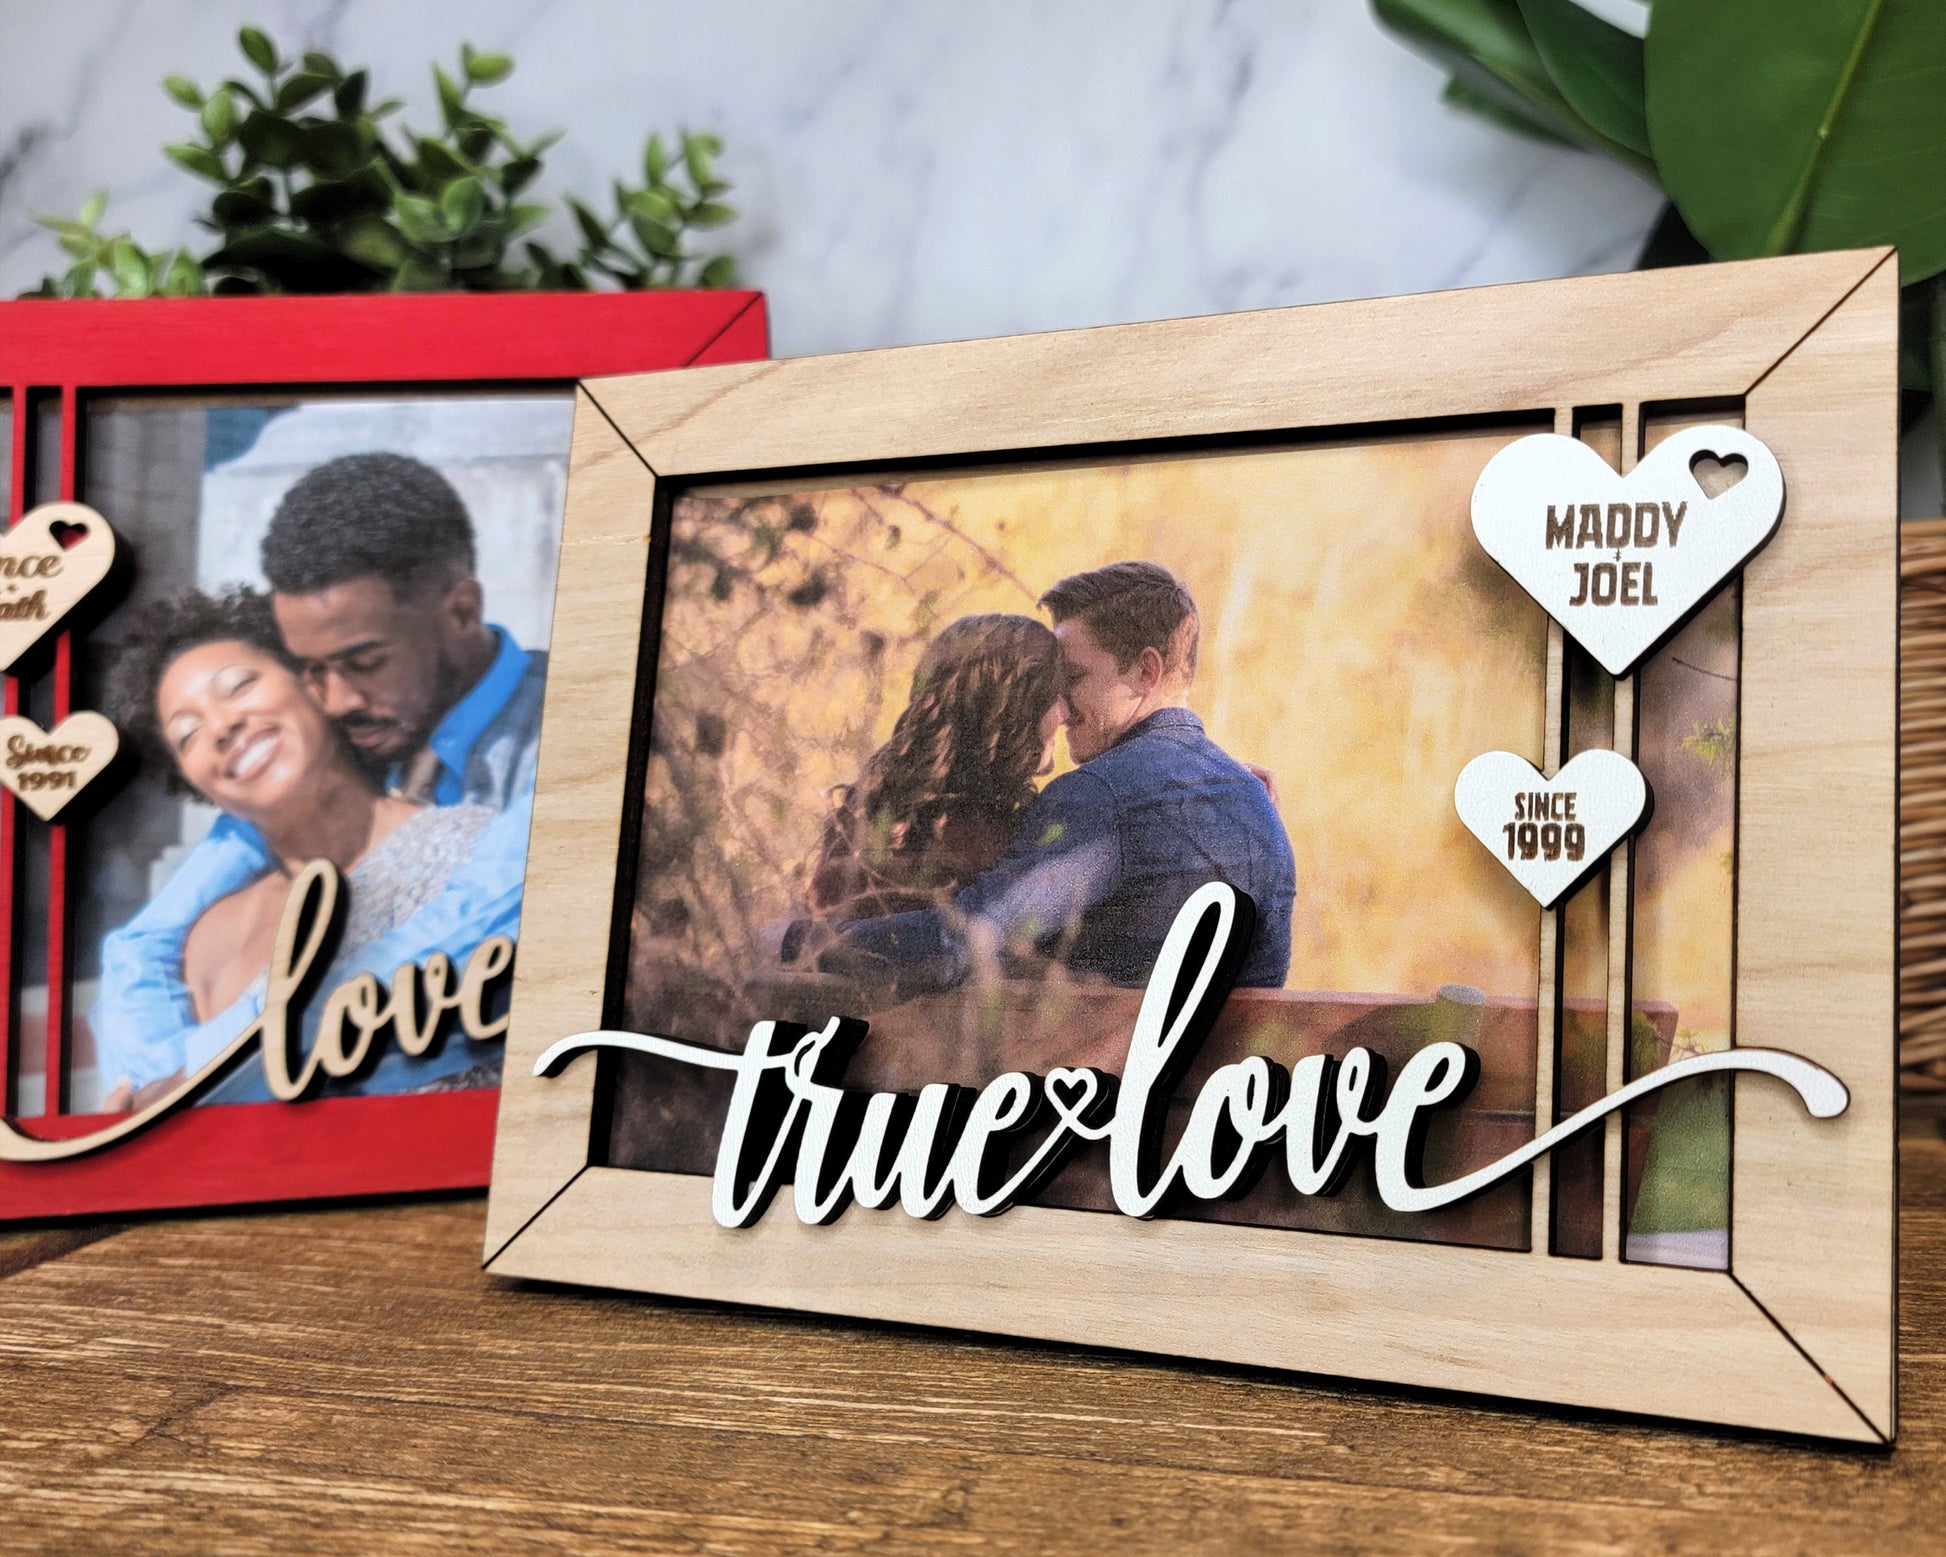 Treasured Moments Photo Frames - Includes Frame Sizes 4x6, 5x5, 5x7, 8x10 - 6 text options - Tested on Glowforge & Lightburn